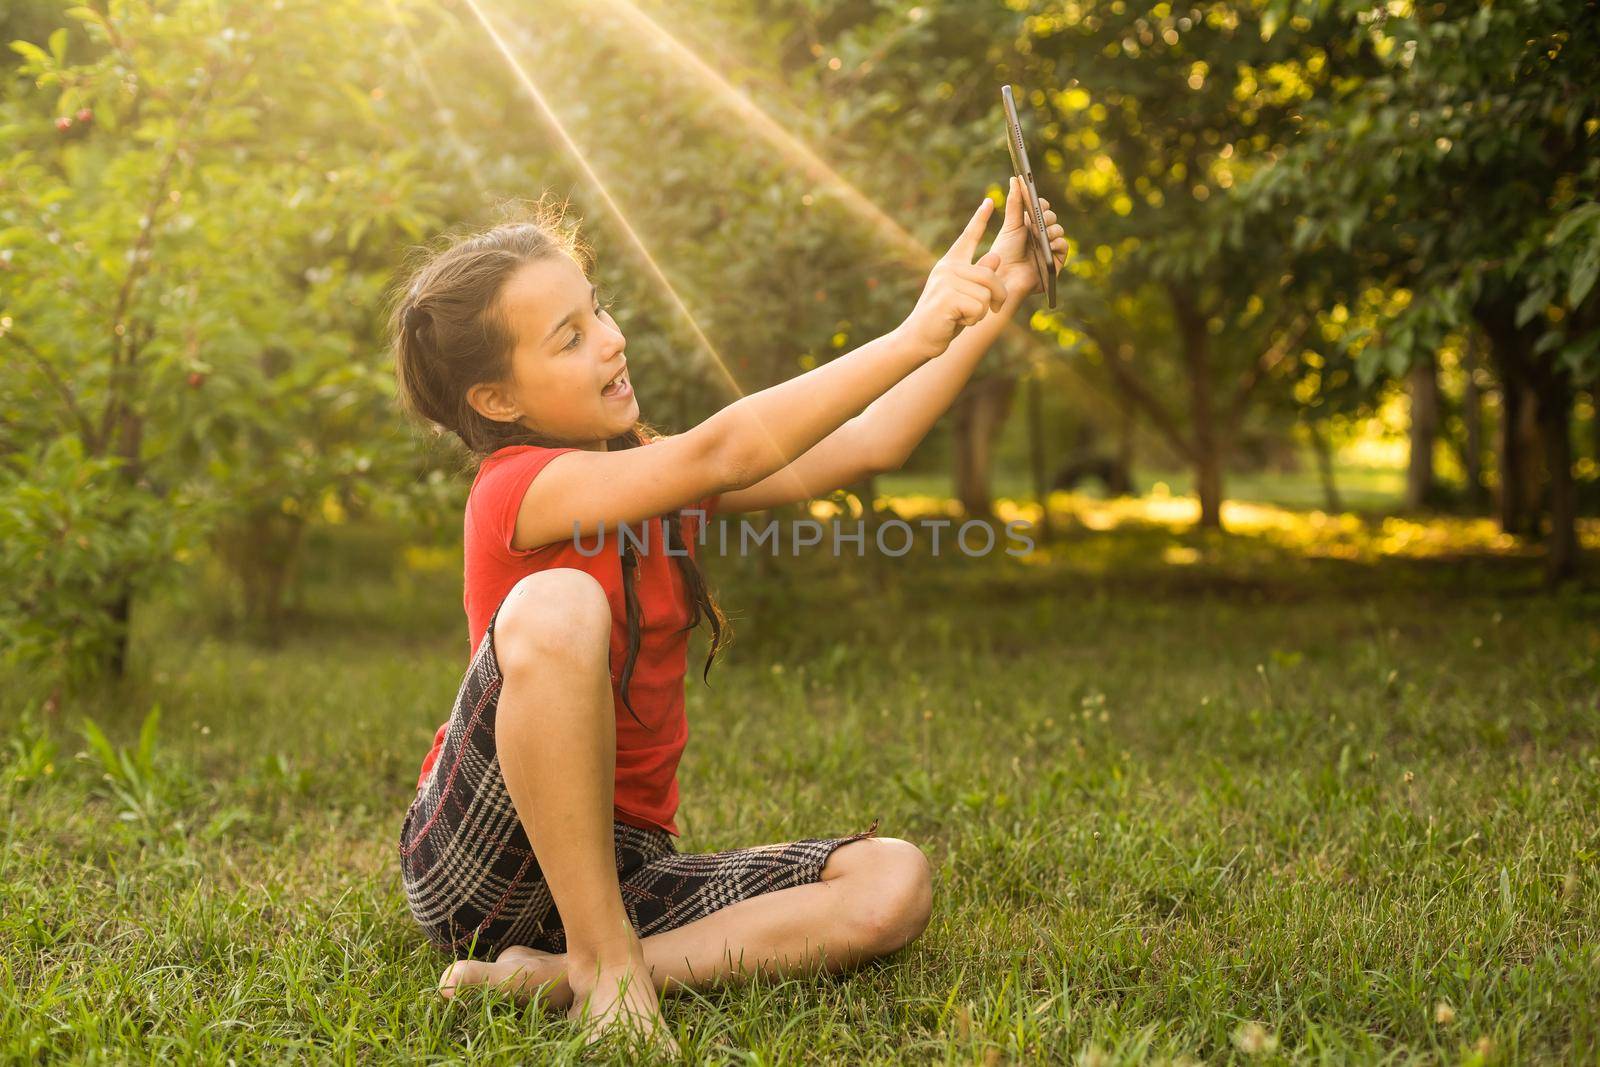 Girl on the grass with a tablet chat in her hands in the garden by Andelov13